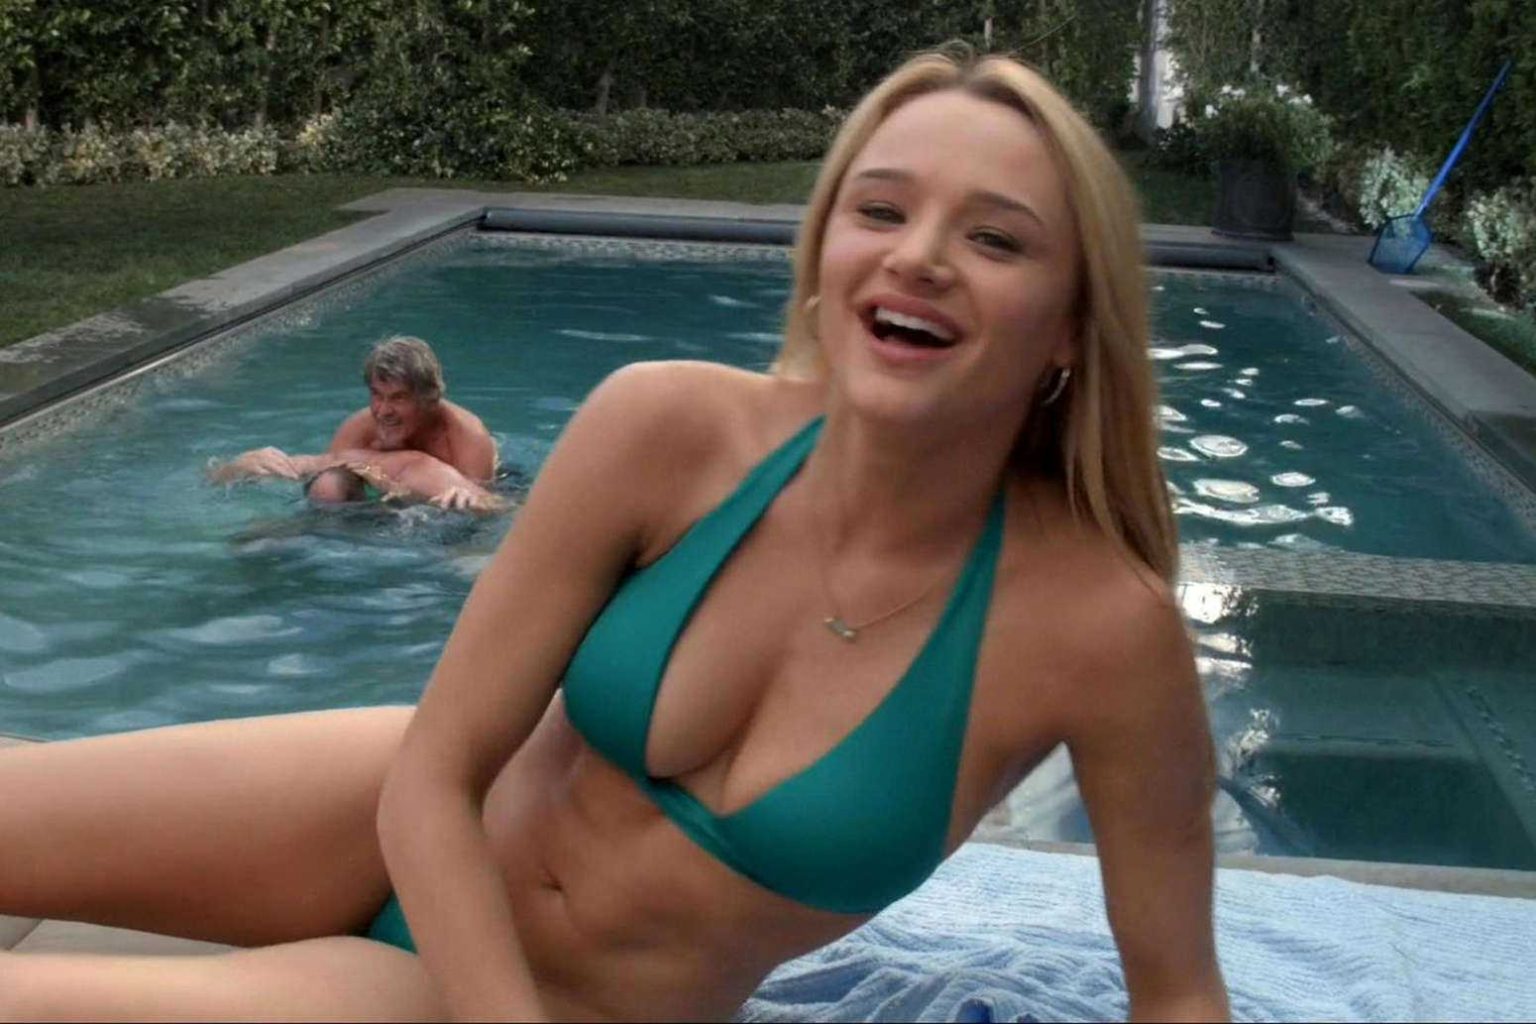 51 Hunter King Nude Pictures Display Her As A Skilled Performer 50